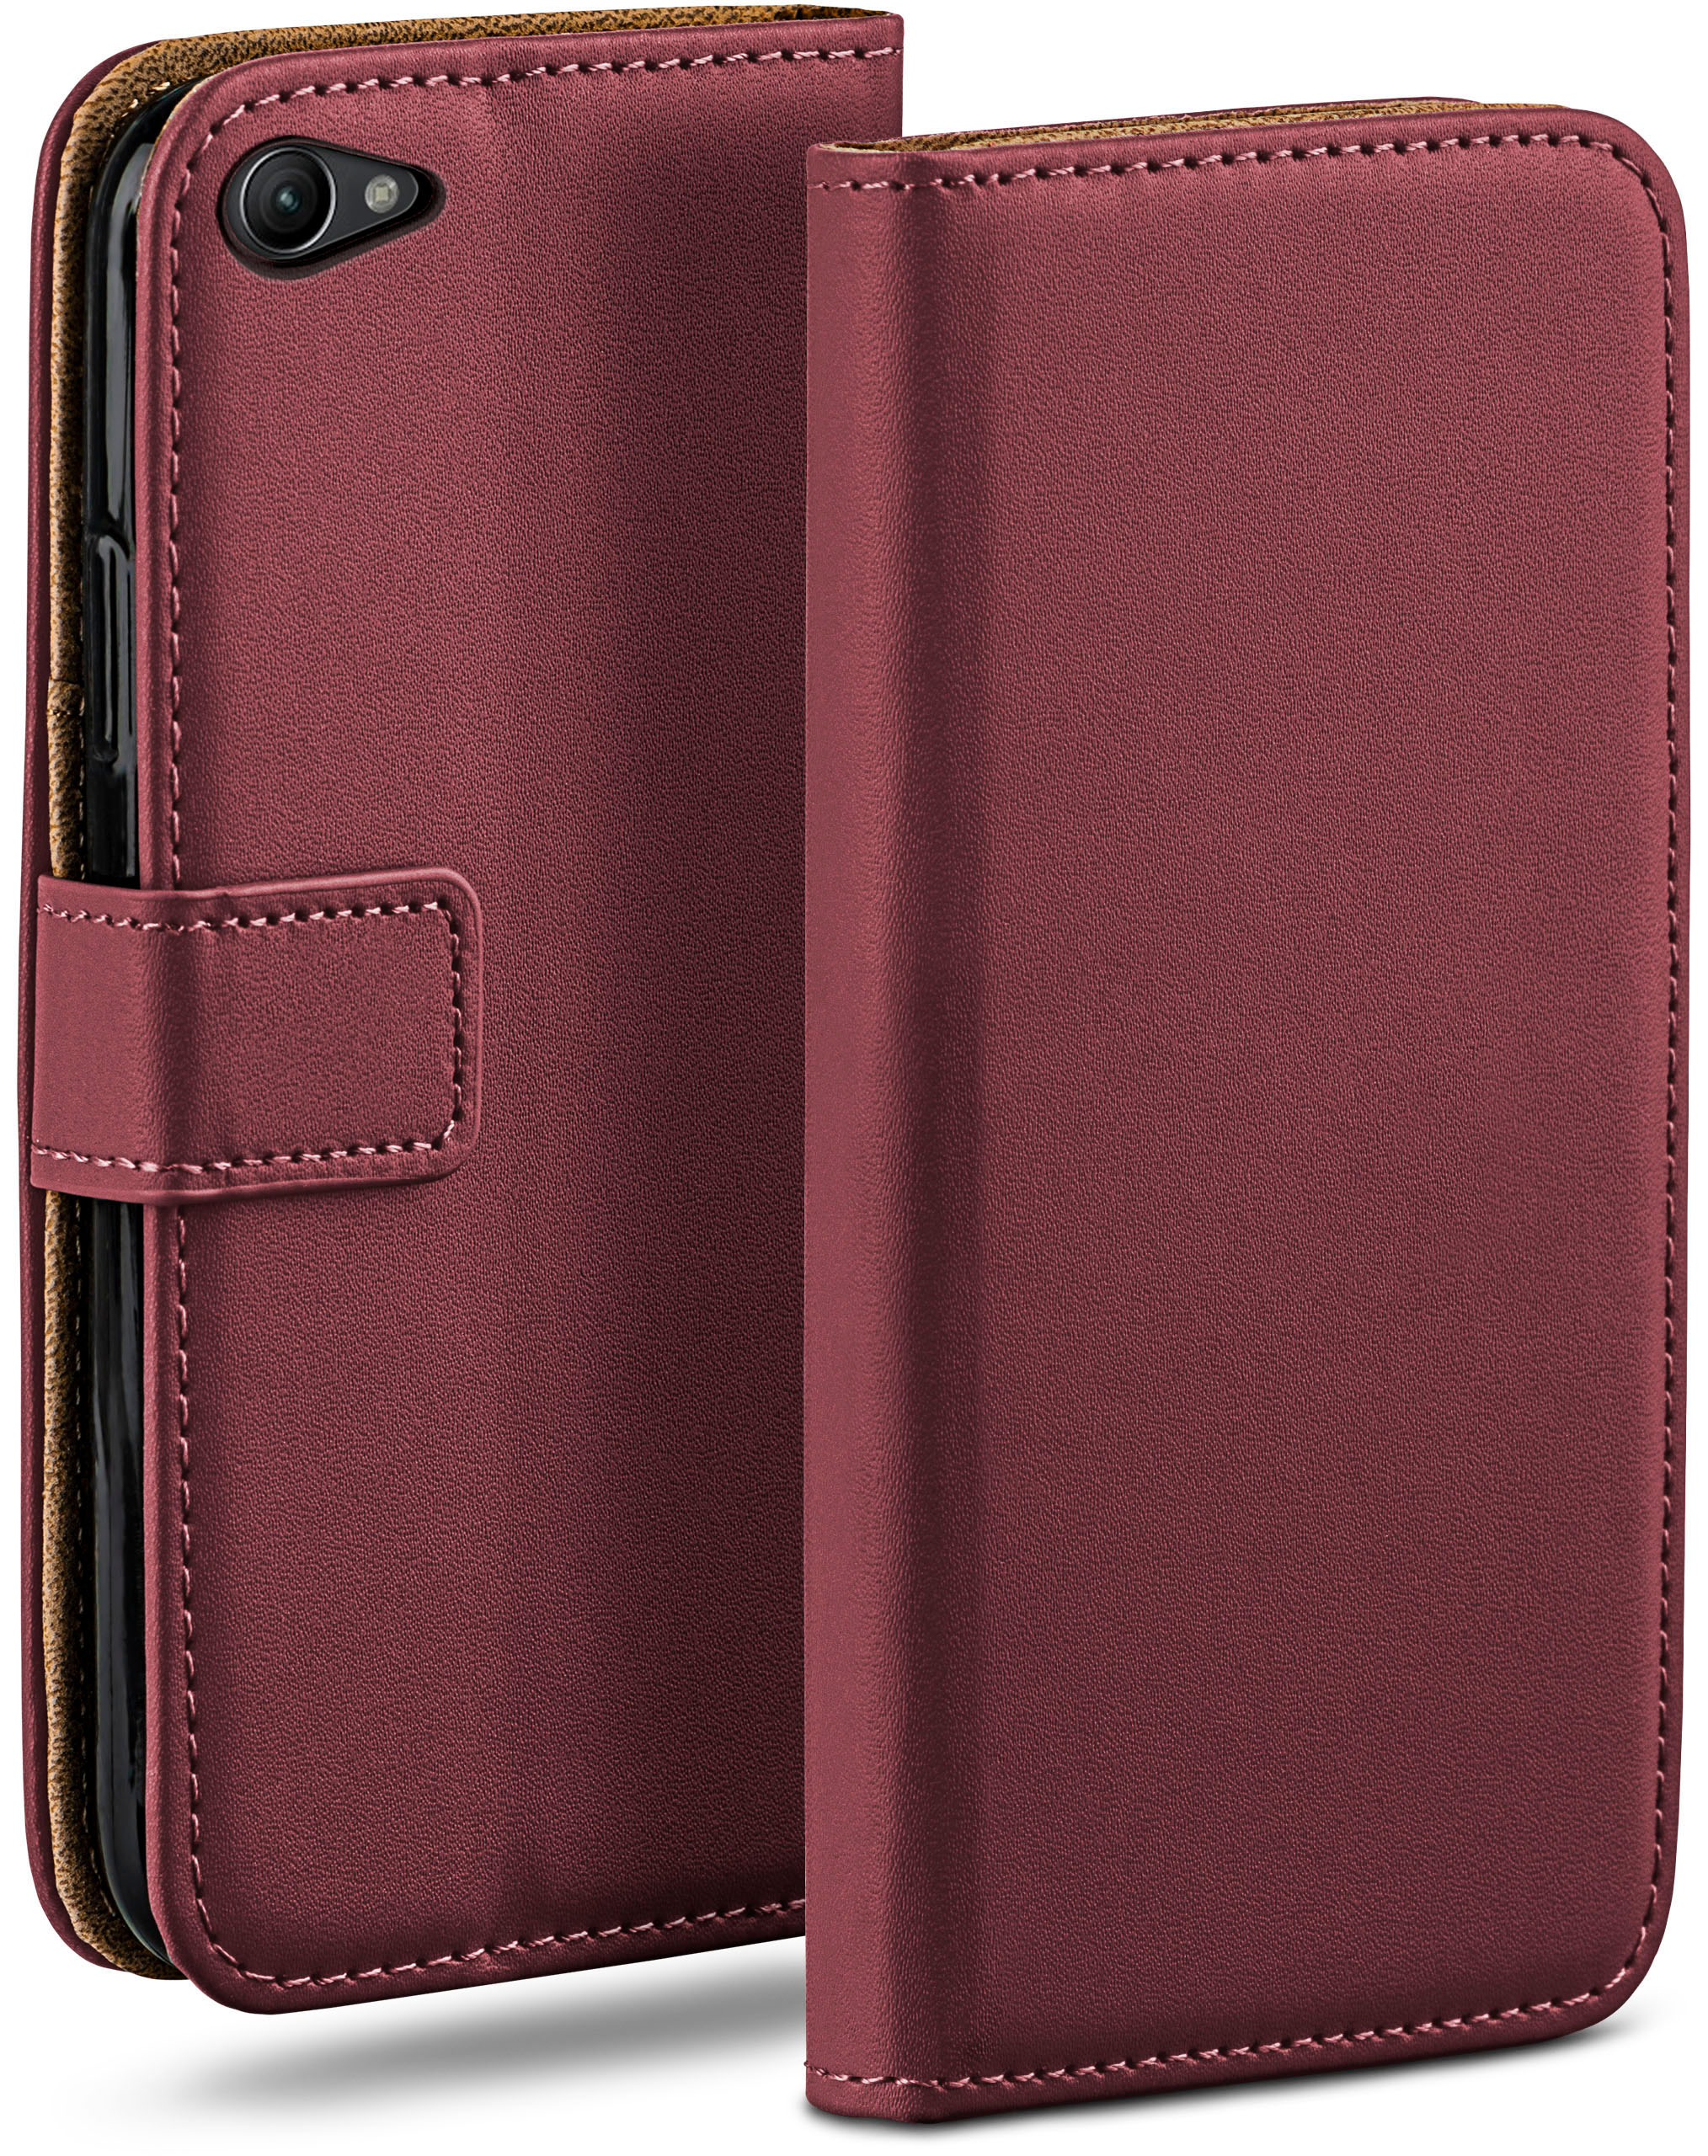 MOEX Book Case, Bookcover, Sony, Maroon-Red Z1 Xperia Compact